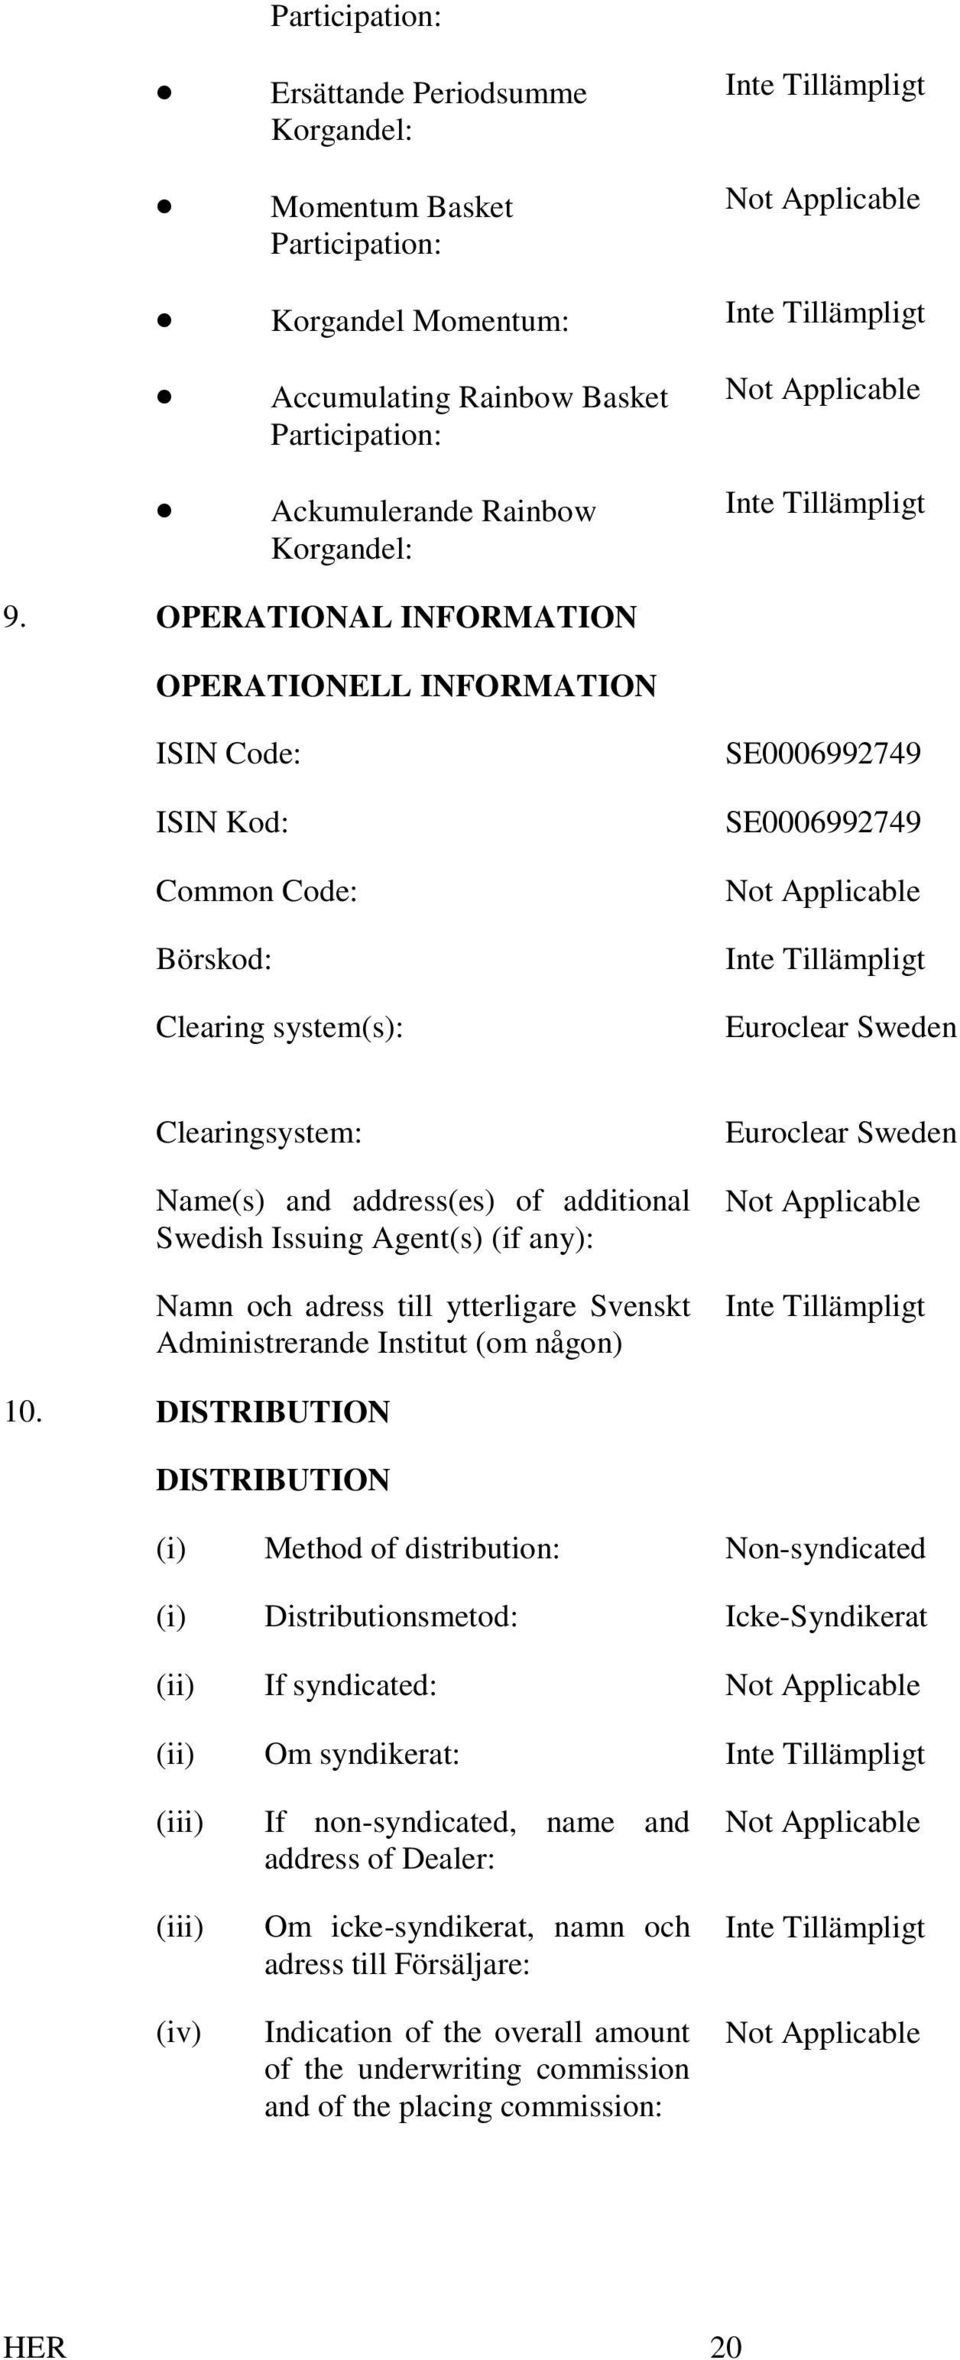 OPERATIONAL INFORMATION OPERATIONELL INFORMATION ISIN Code: ISIN Kod: Common Code: Börskod: Clearing system(s): SE0006992749 SE0006992749 Not Applicable Euroclear Sweden Clearingsystem: Name(s) and